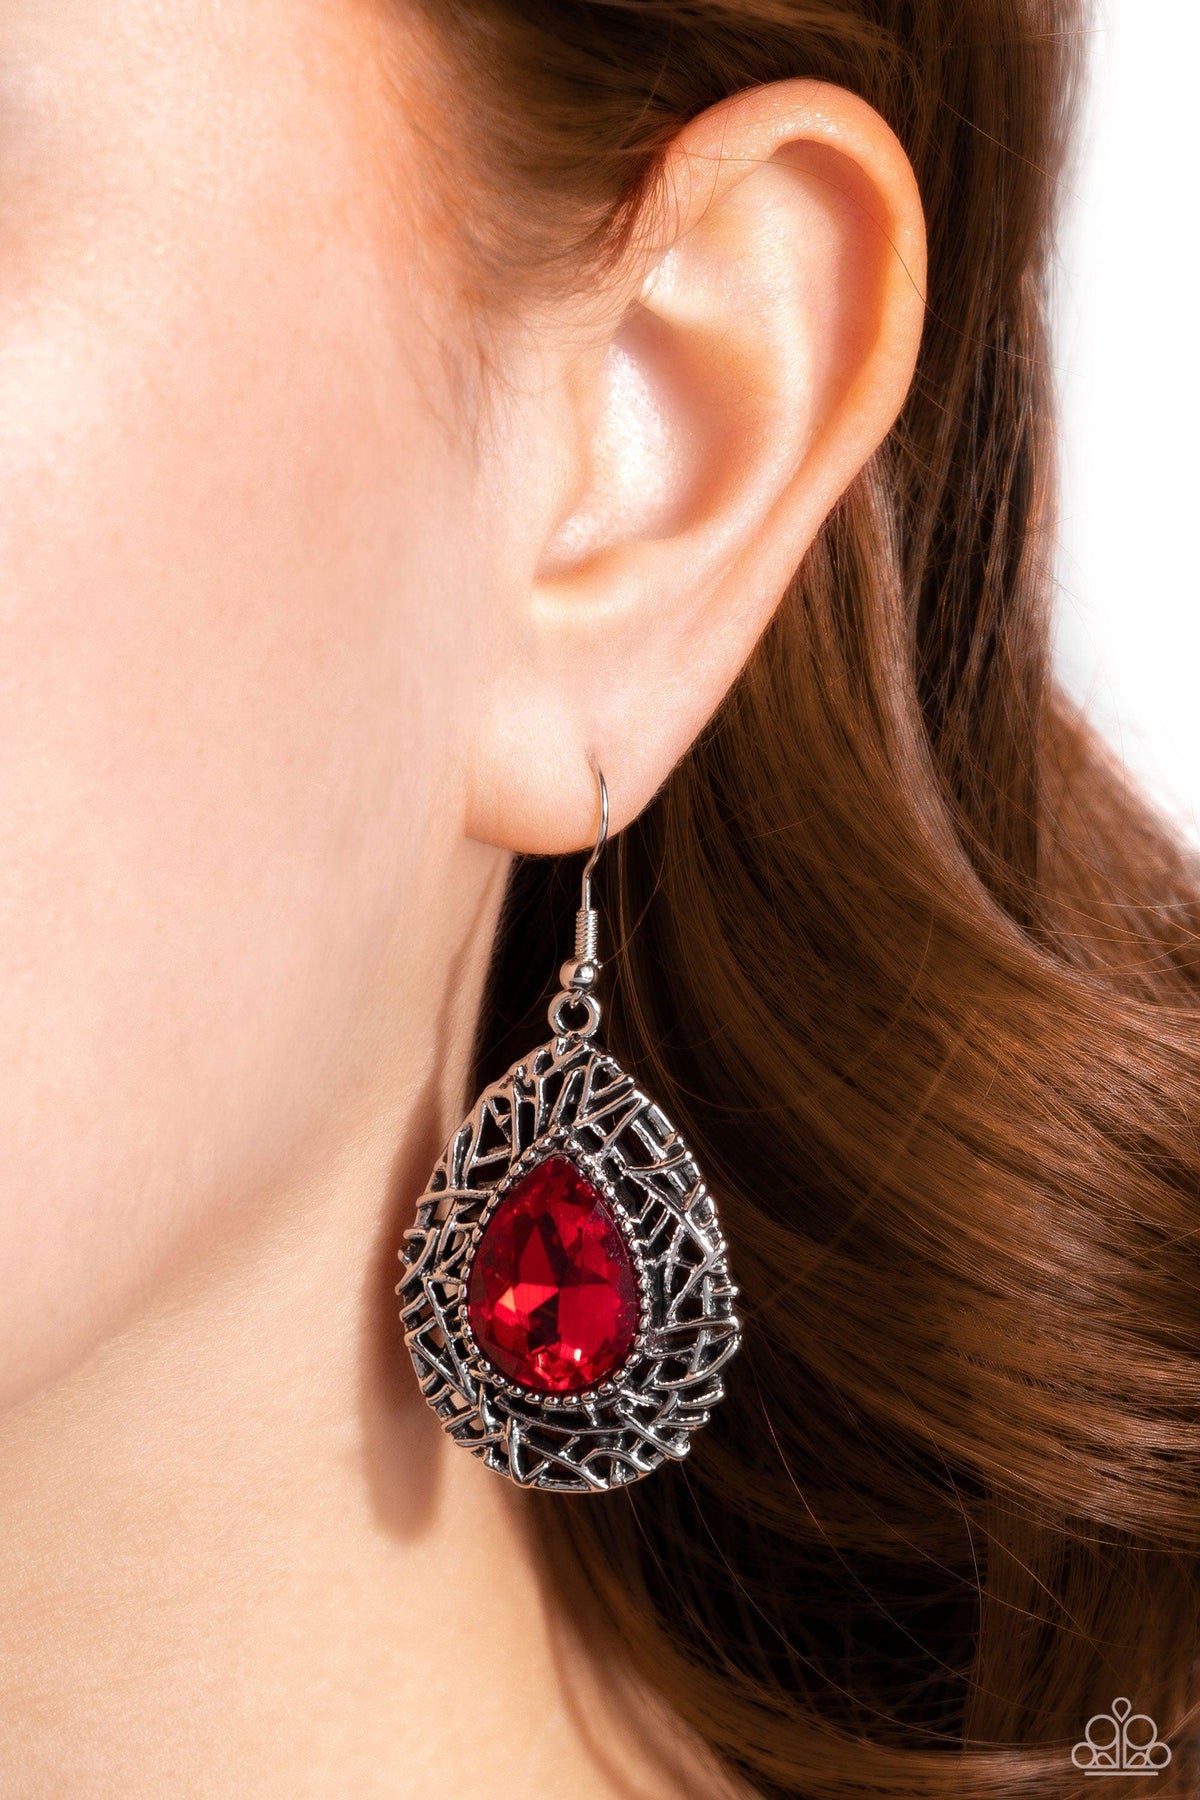 Nest Nouveau Red Rhinestone Earrings - Paparazzi Accessories-on model - CarasShop.com - $5 Jewelry by Cara Jewels